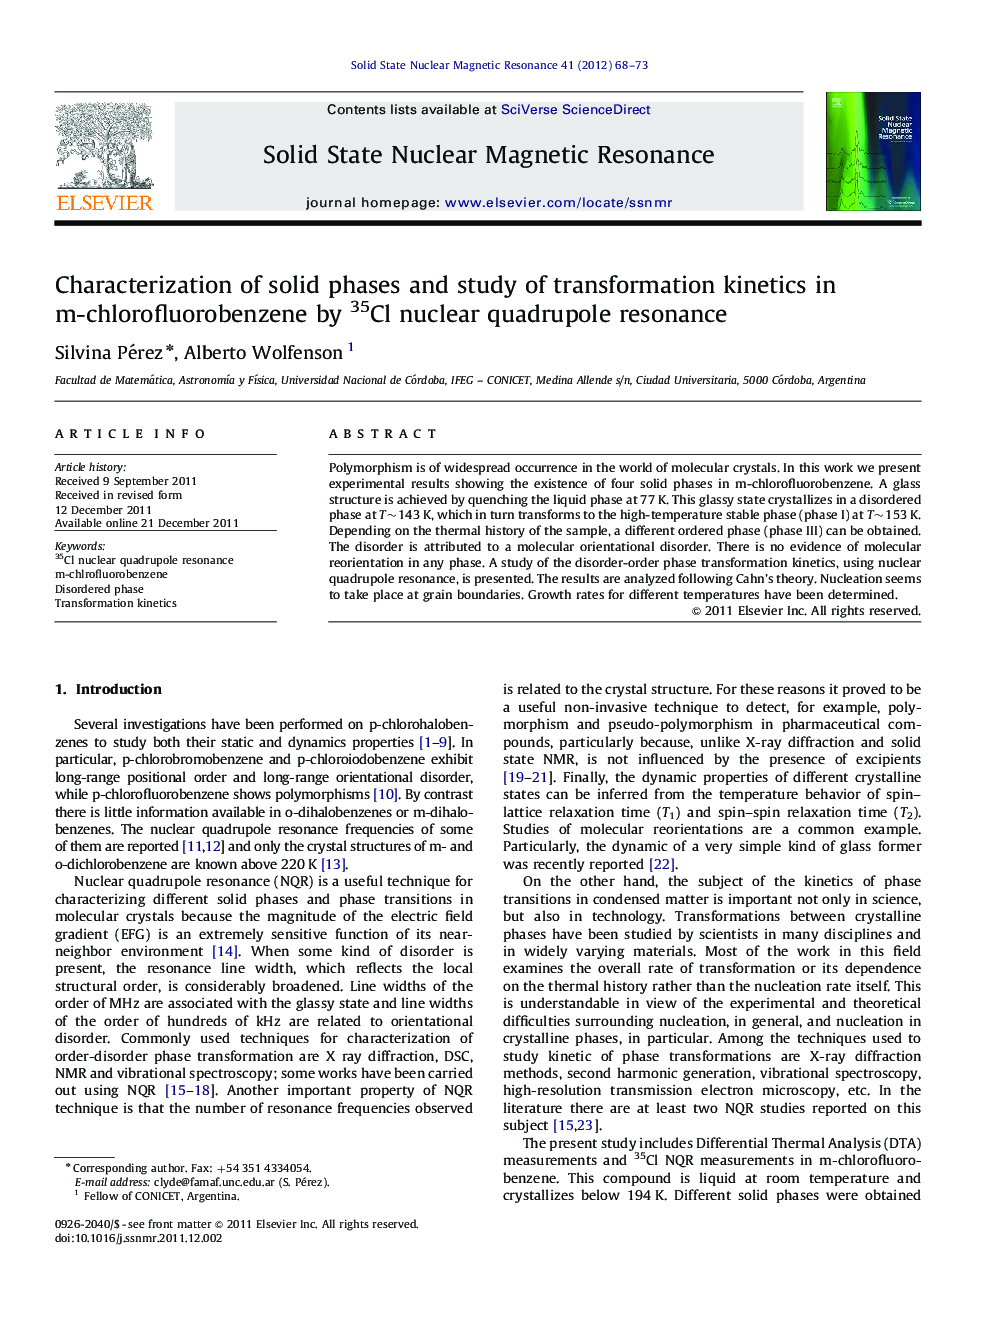 Characterization of solid phases and study of transformation kinetics in m-chlorofluorobenzene by 35Cl nuclear quadrupole resonance